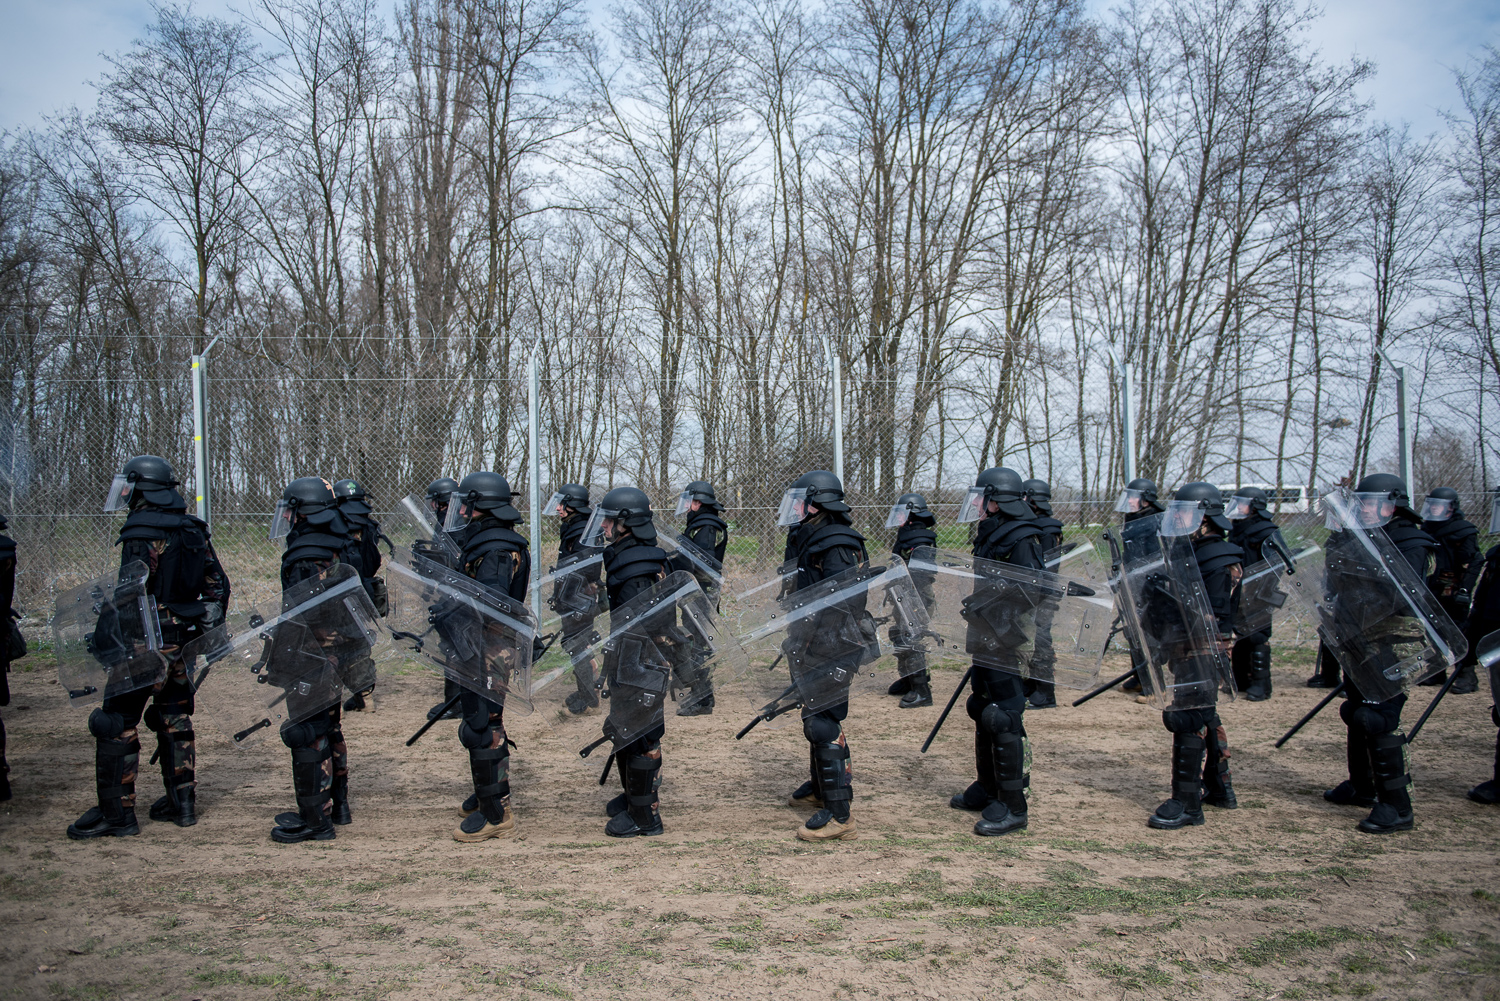  Riot soldiers stand in front of a practice fence at a military practice  near Kelebia, Hungary 22 March 2018. The fence was constructed in the middle of the European migration crisis in 2015, with the aim to ensure border security by preventing immi